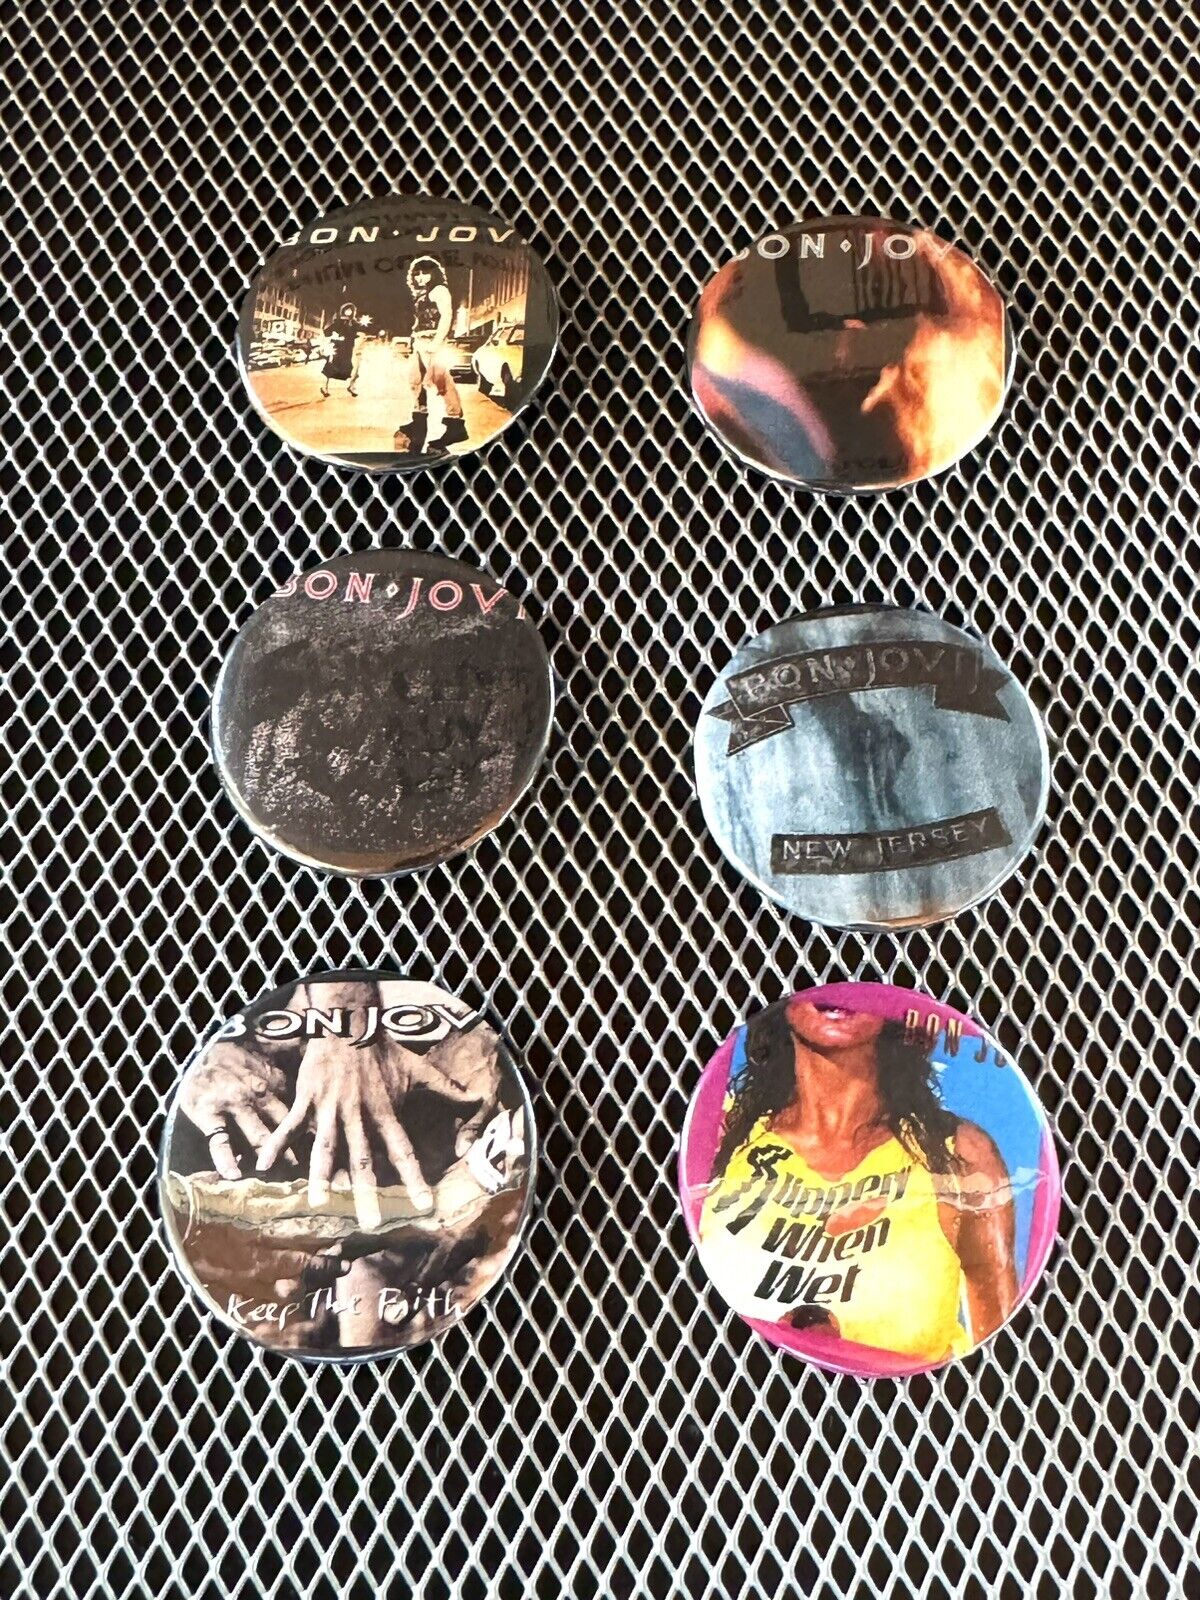 Bon Jovi “The First 5” Album Covers 1.5” Pin Back Buttons W/ Chase Button